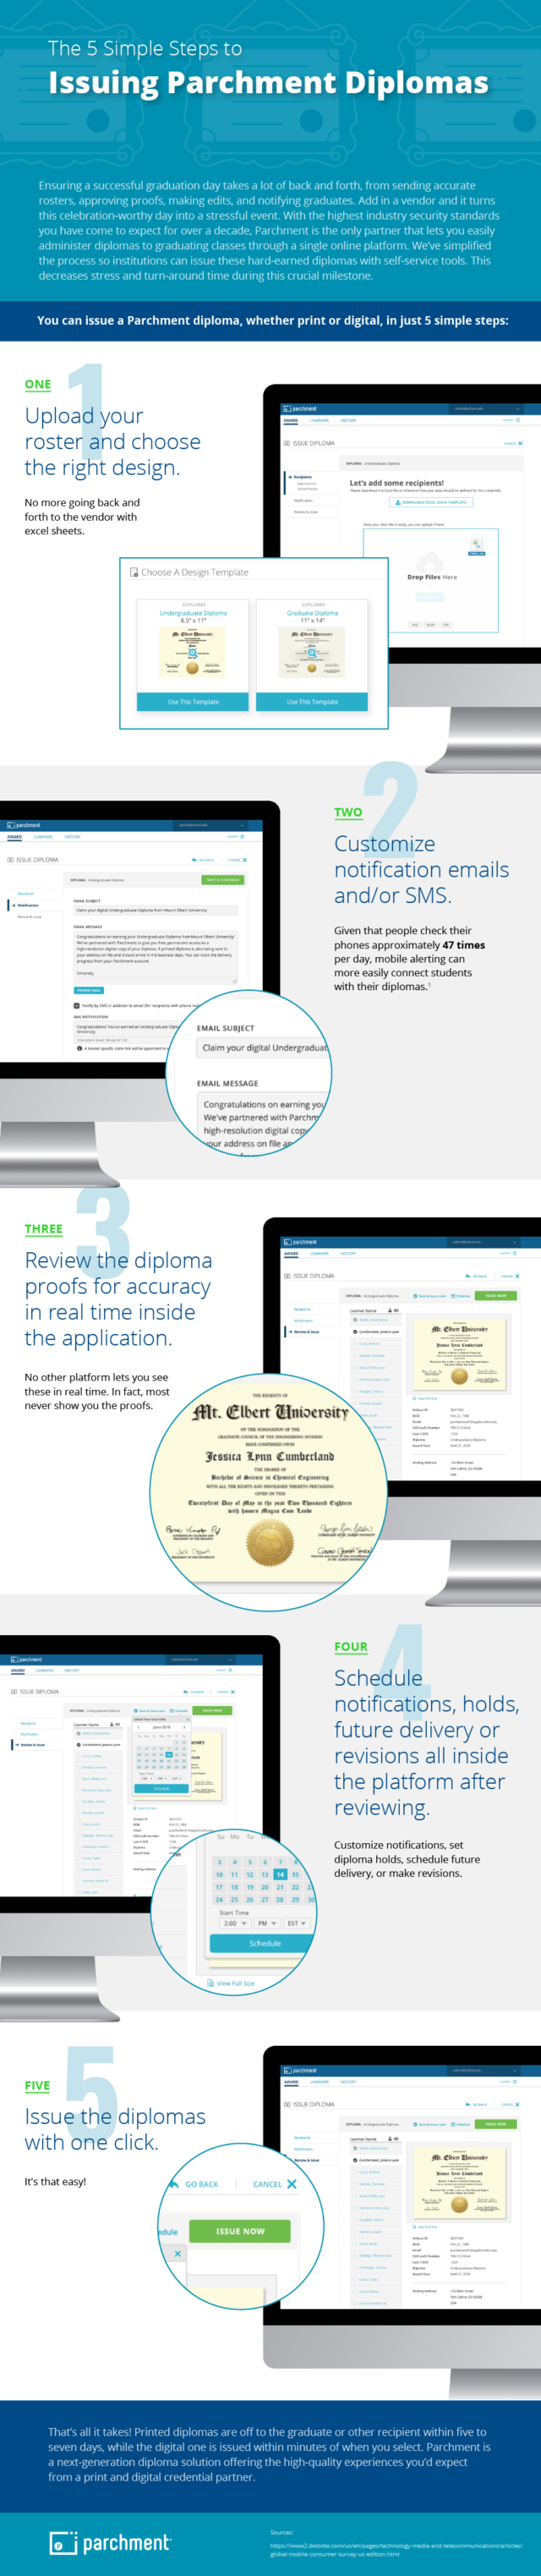 5 Simple Steps To Issue Parchment Diplomas